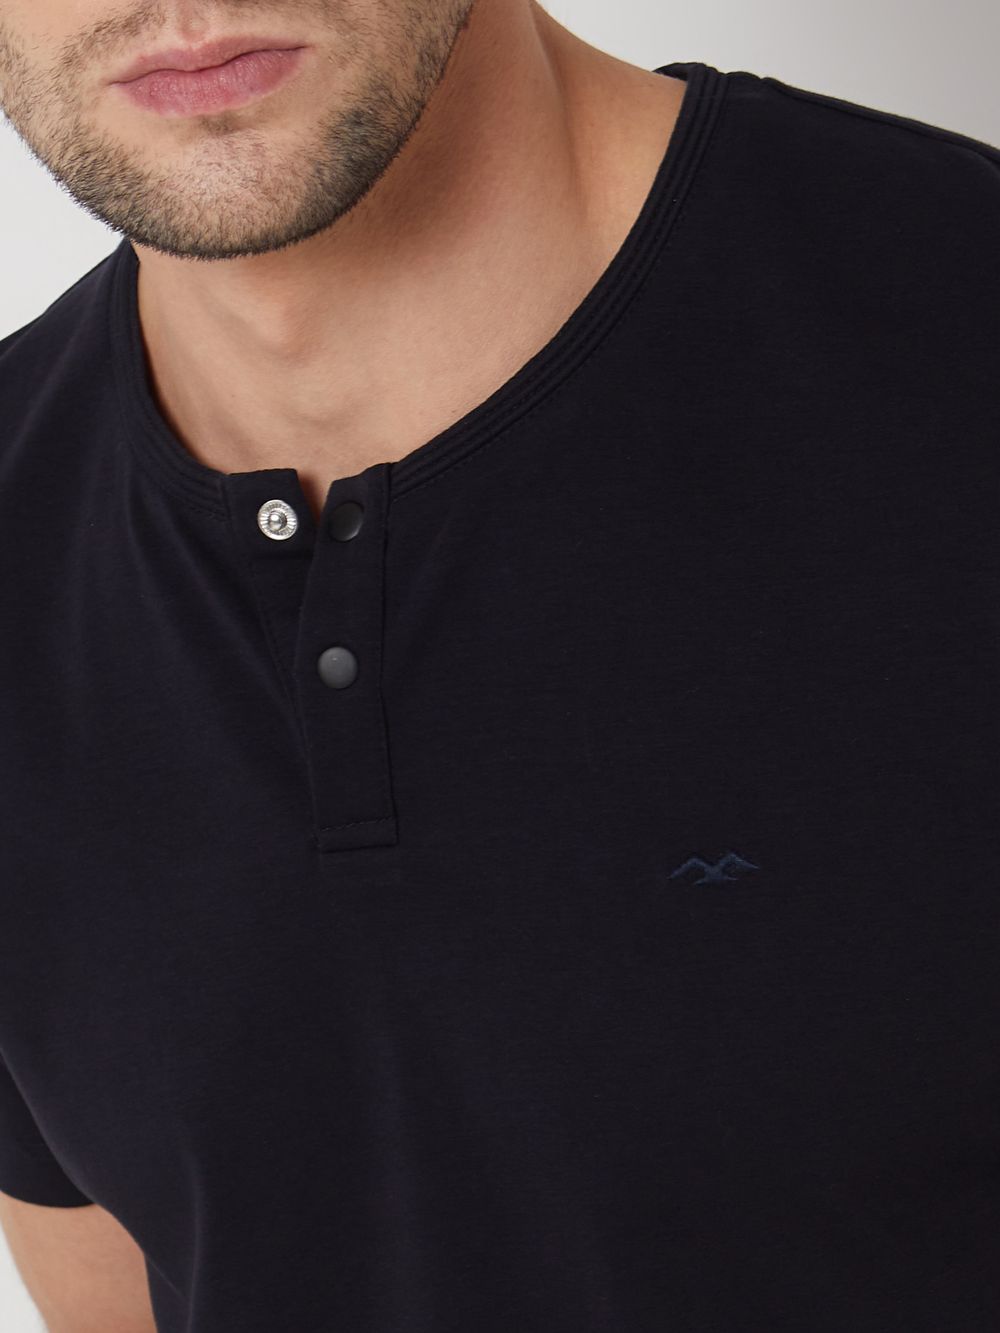 Navy Snap Button Plain Slim Fit Casual Henley